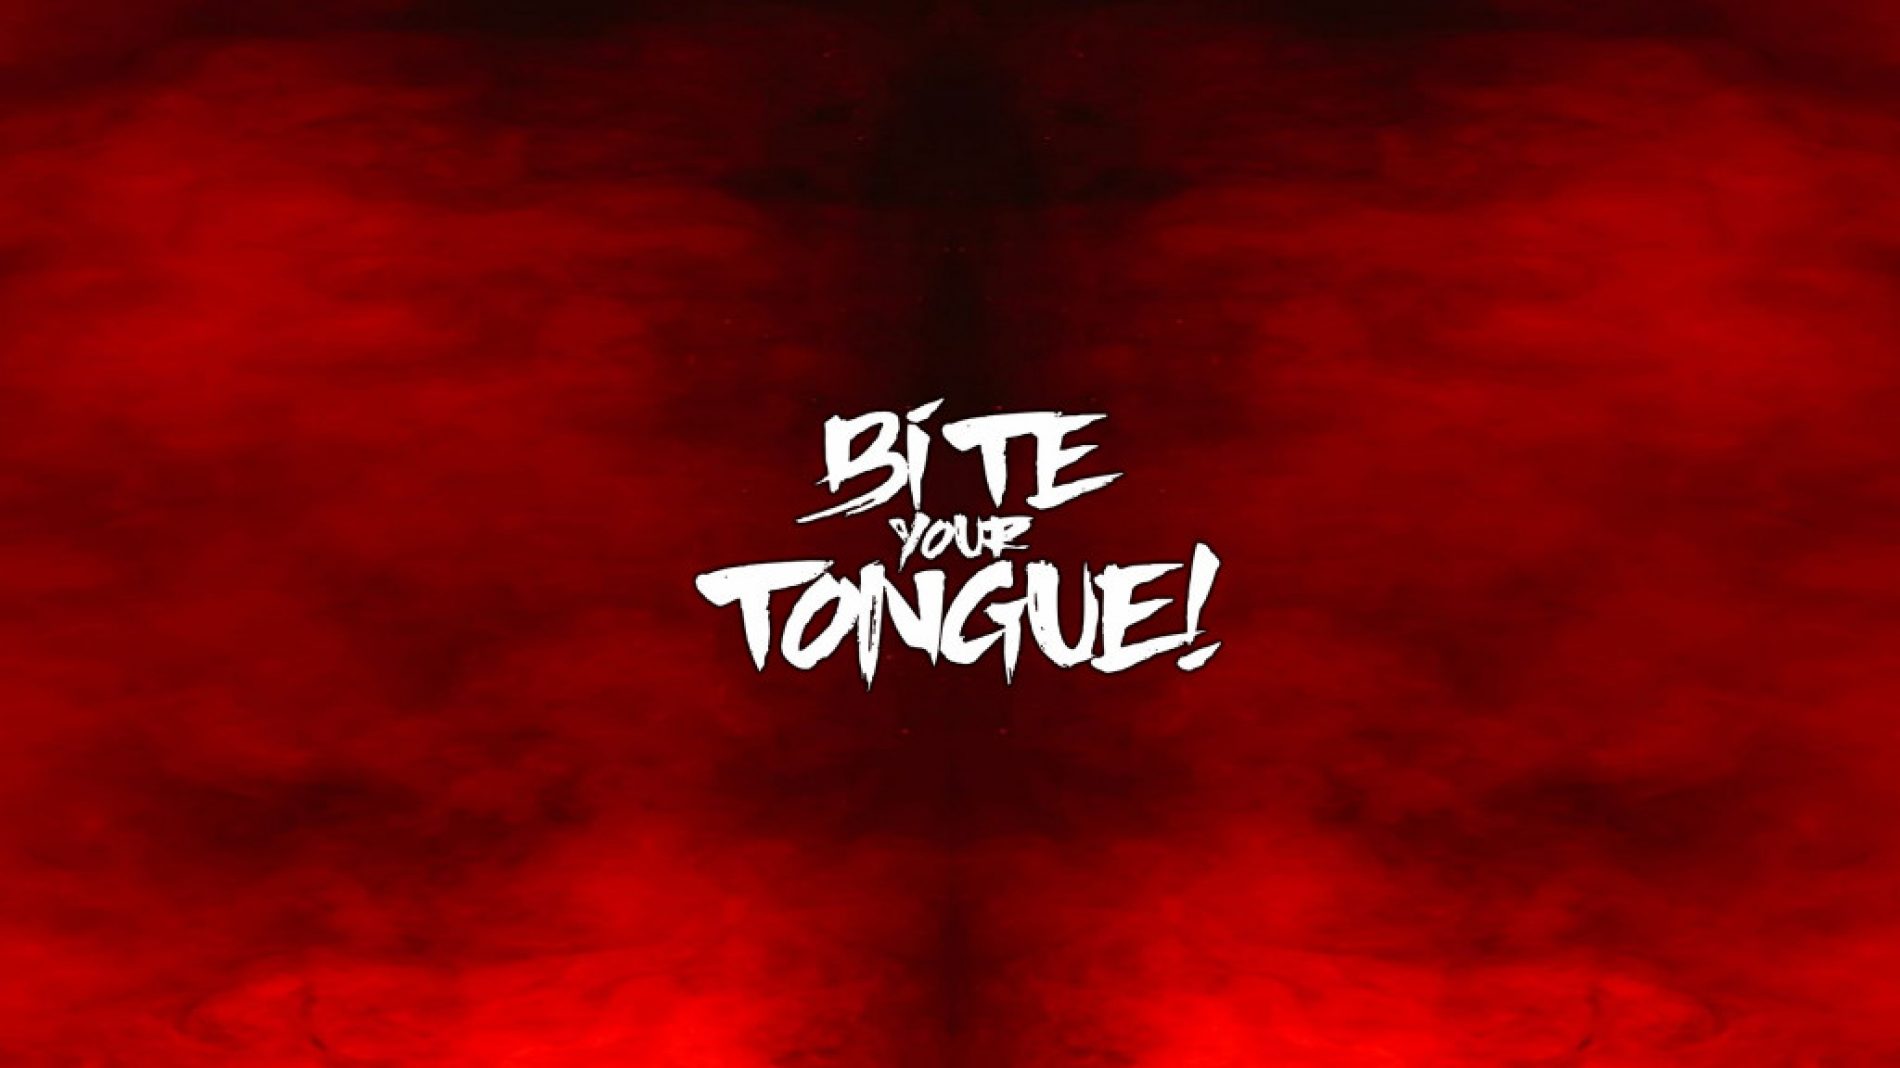 Bite Your Tongue! – They come from inside (proiect nou, videoclip nou)